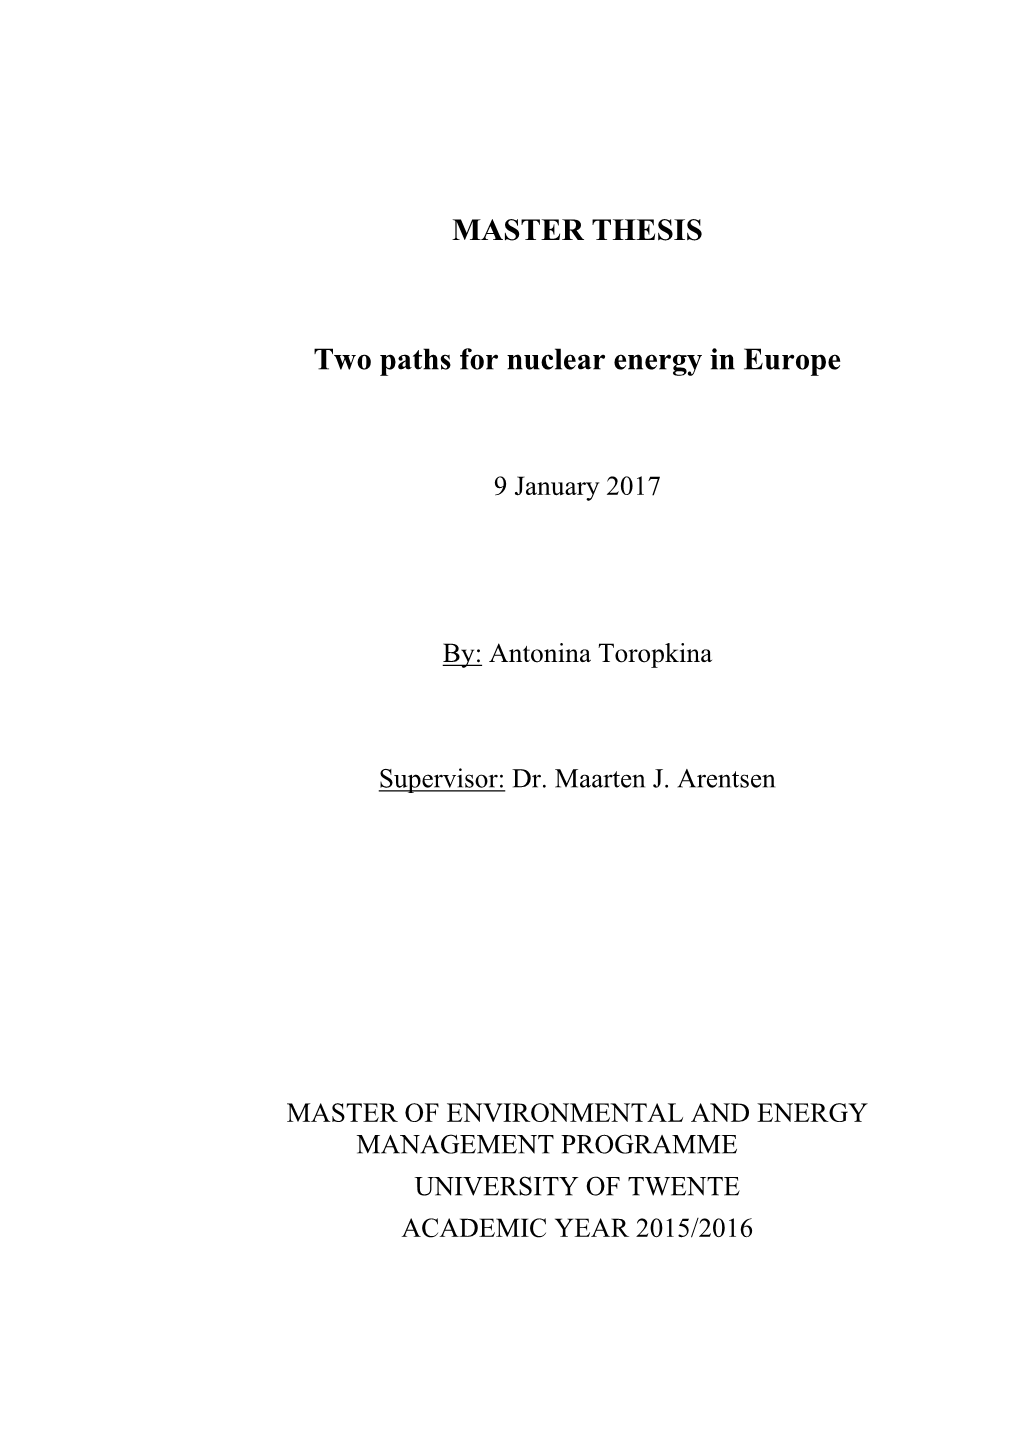 MASTER THESIS Two Paths for Nuclear Energy in Europe